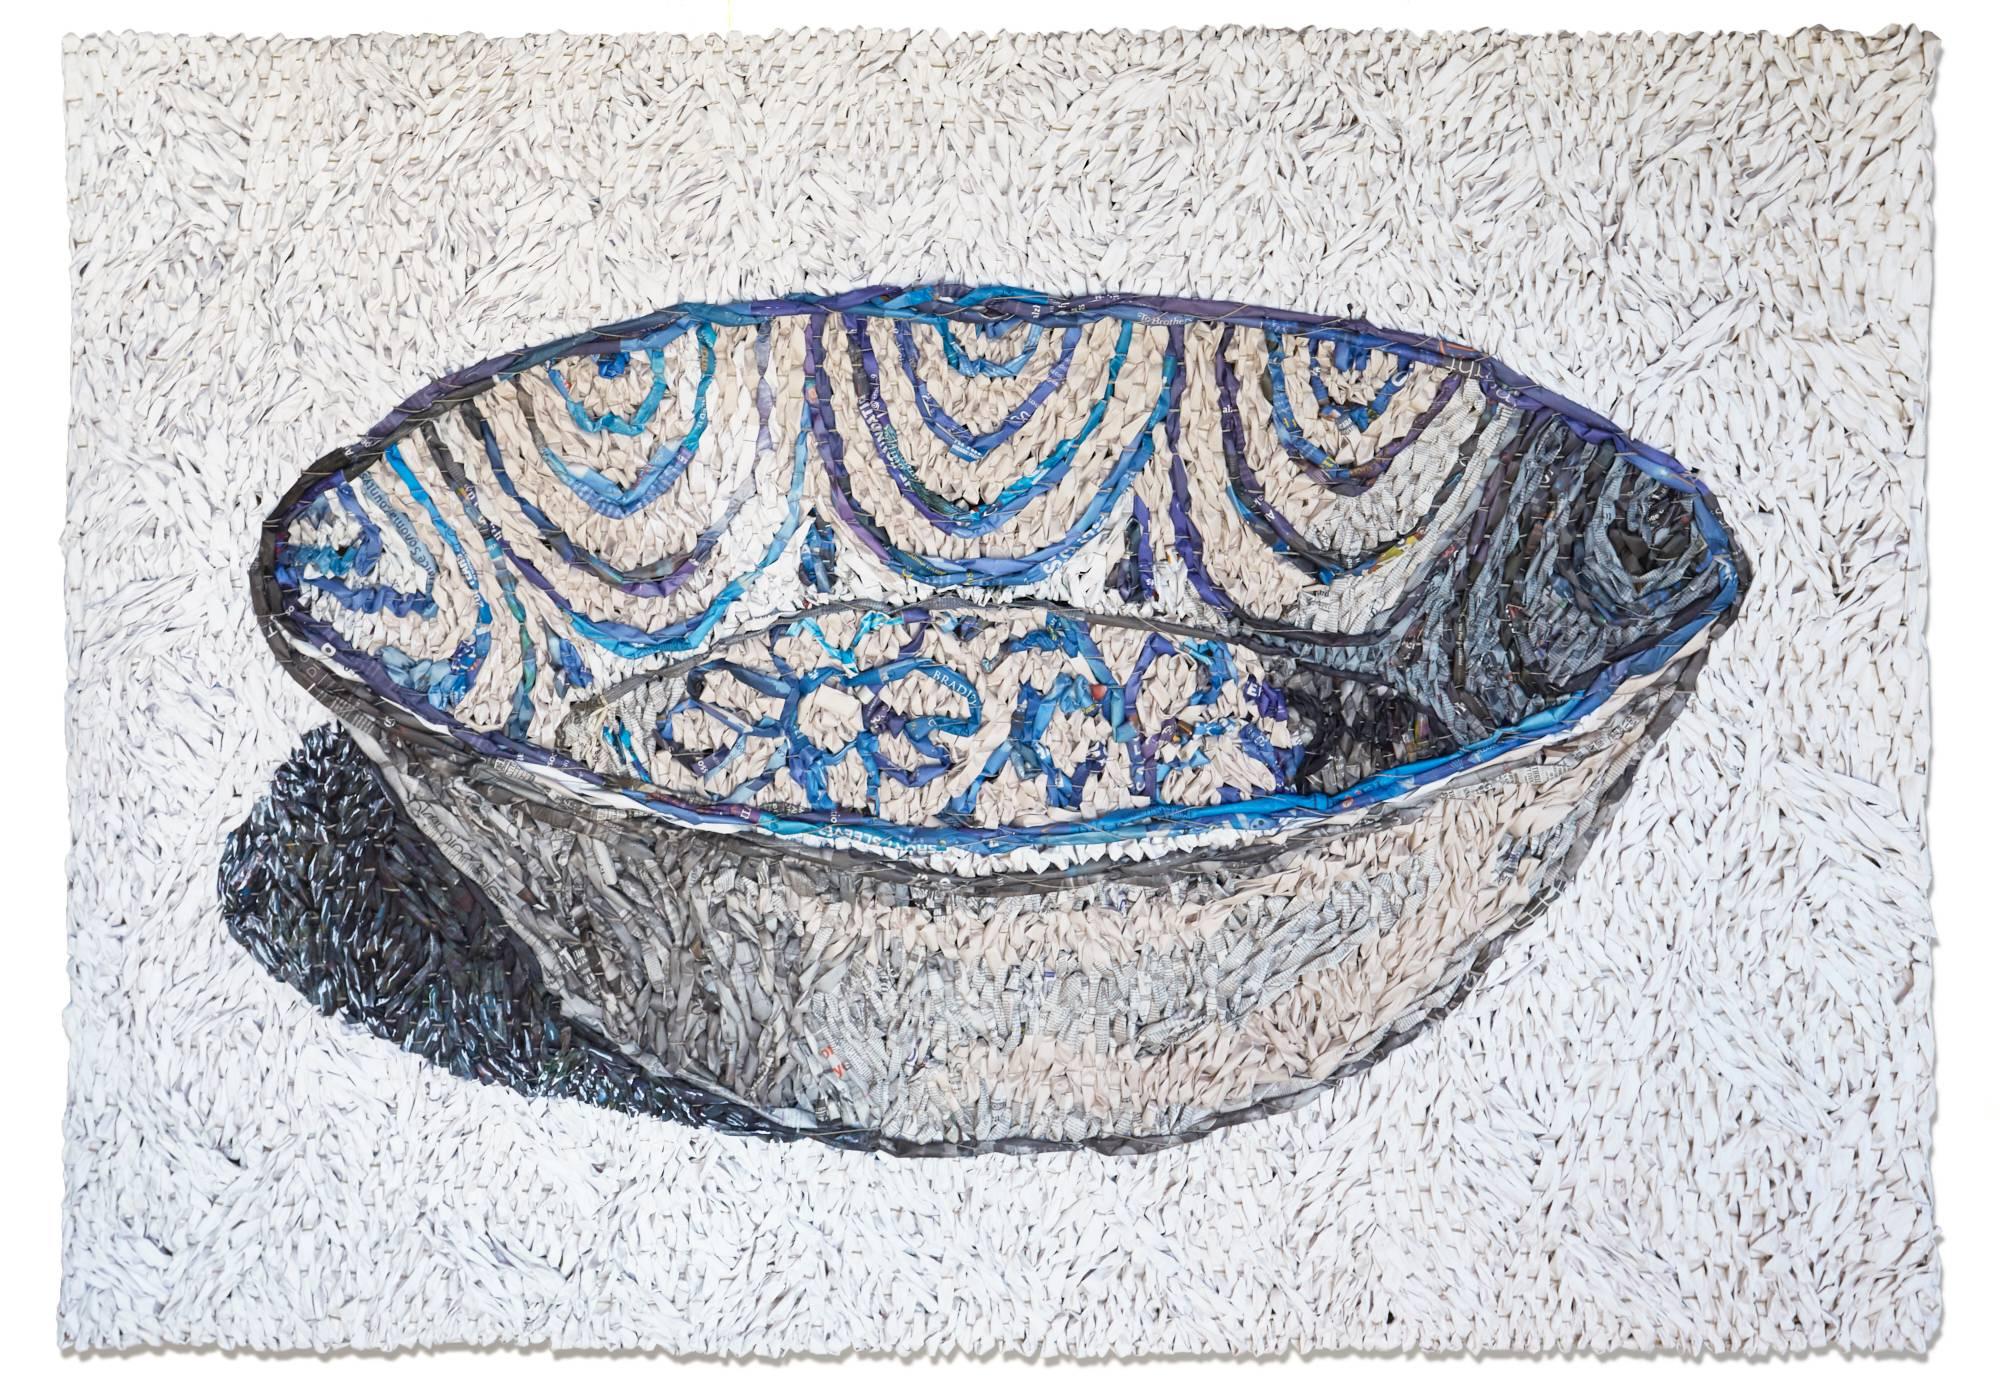 Spanish Bowls  - Mixed Media Art by Gugger Petter